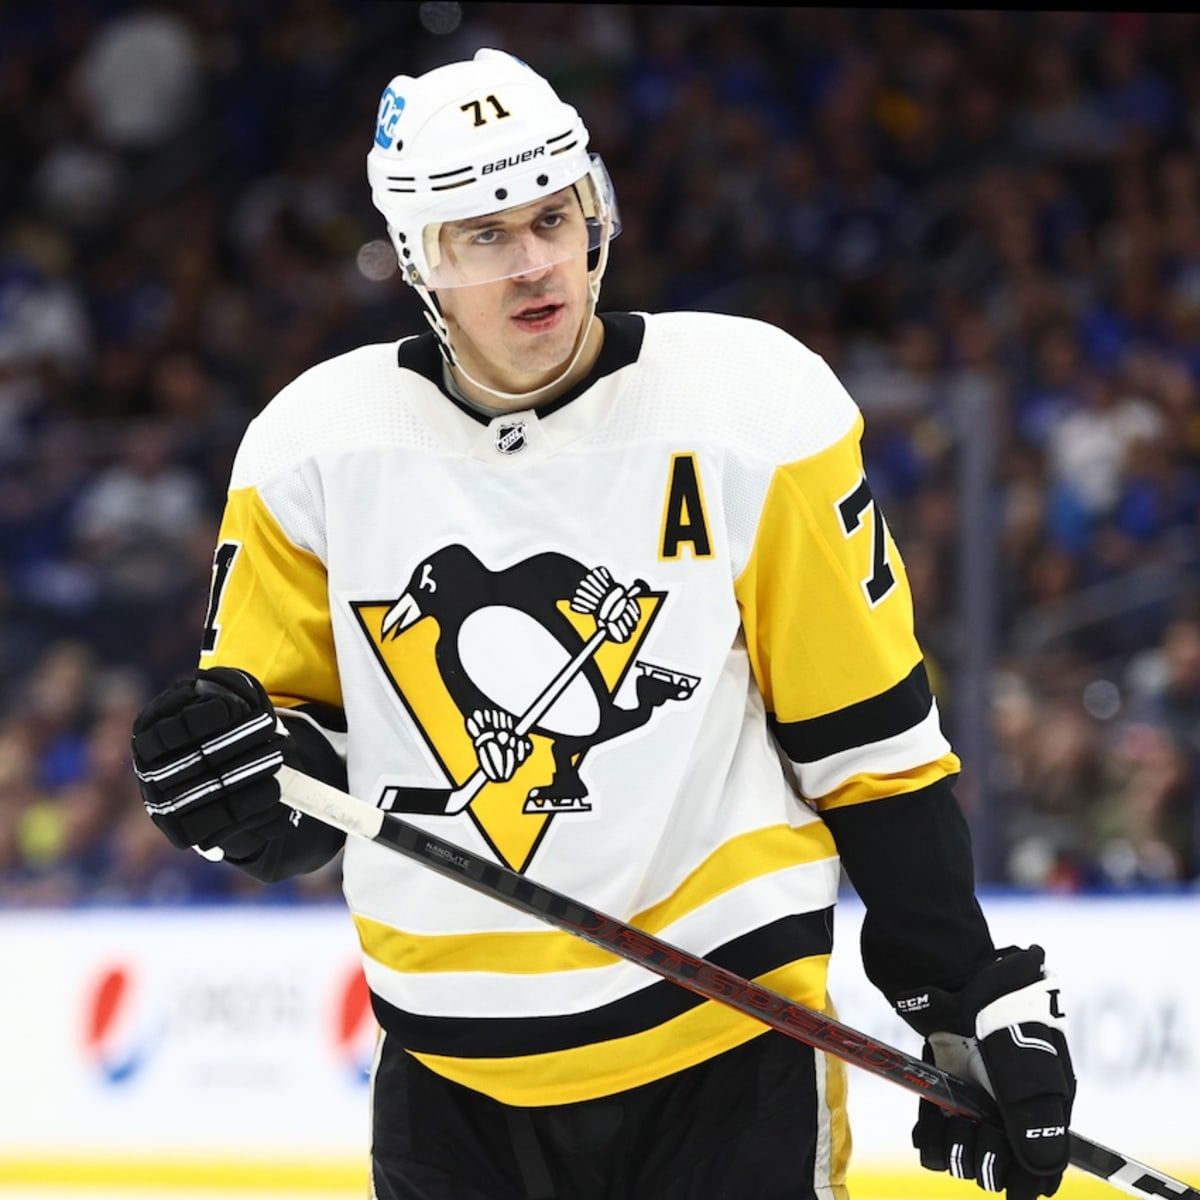 NHL on X: Evgeni Malkin is having another great season for the @penguins  heading into the #WinterClassic! ❄️ Watch the 2023 @Discover NHL  #WinterClassic on January 2nd at 2p ET on @Sportsnet, @